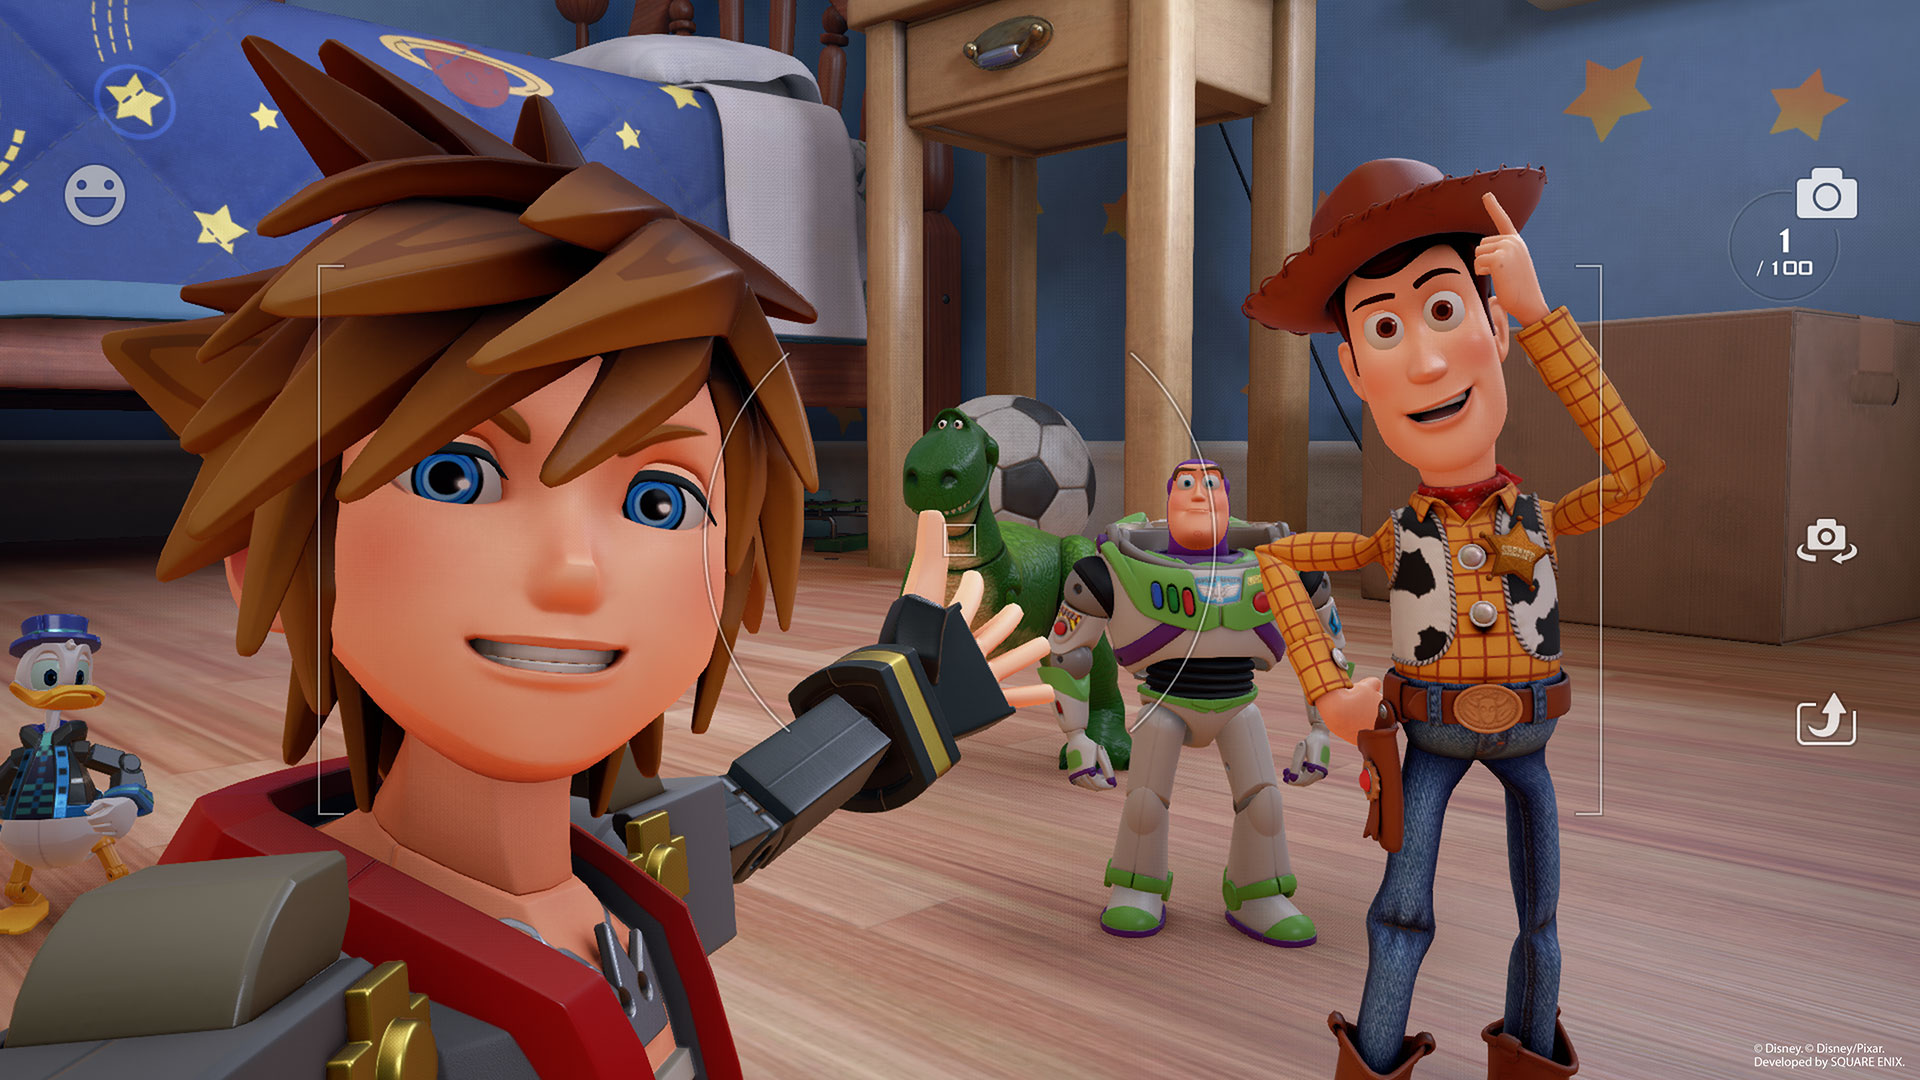 Kingdom Hearts launches on Steam June 13